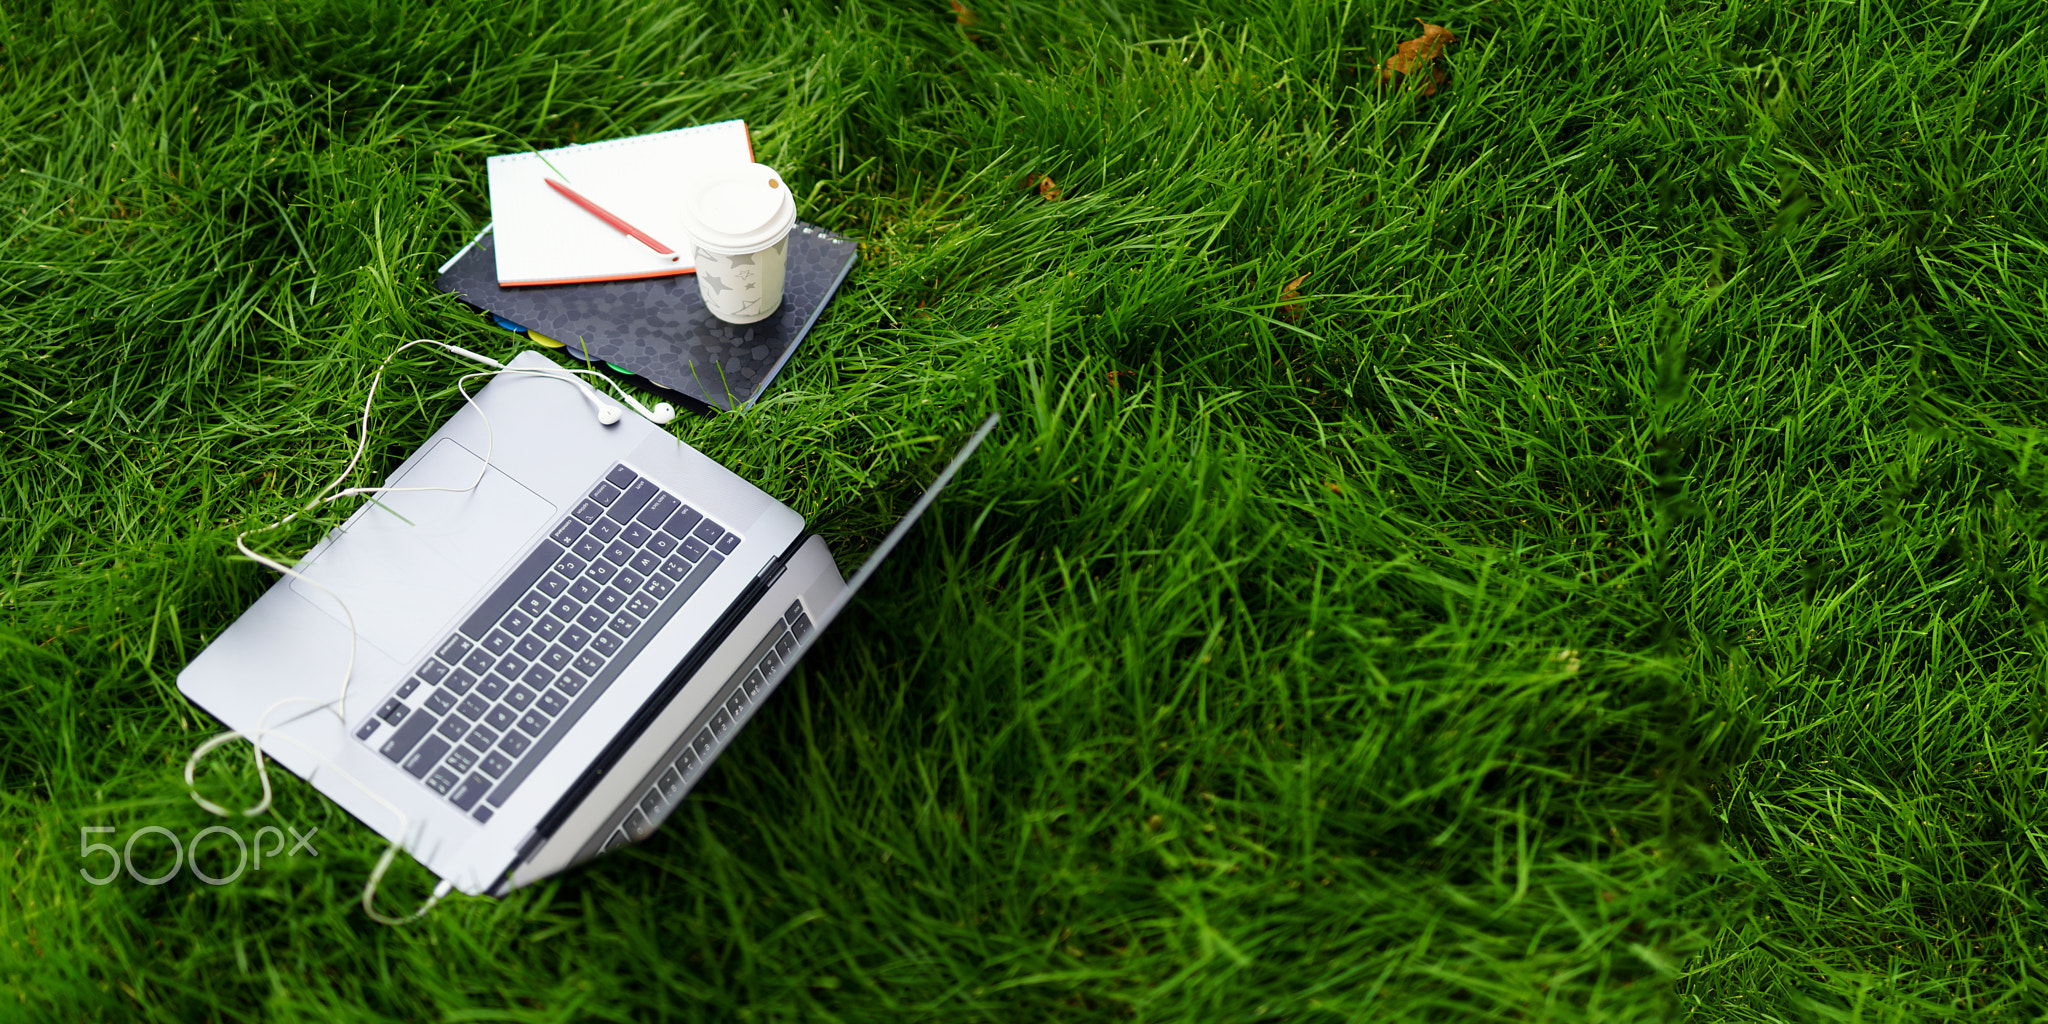 Elements of work or study on the grass, outdoors: an open laptop, a